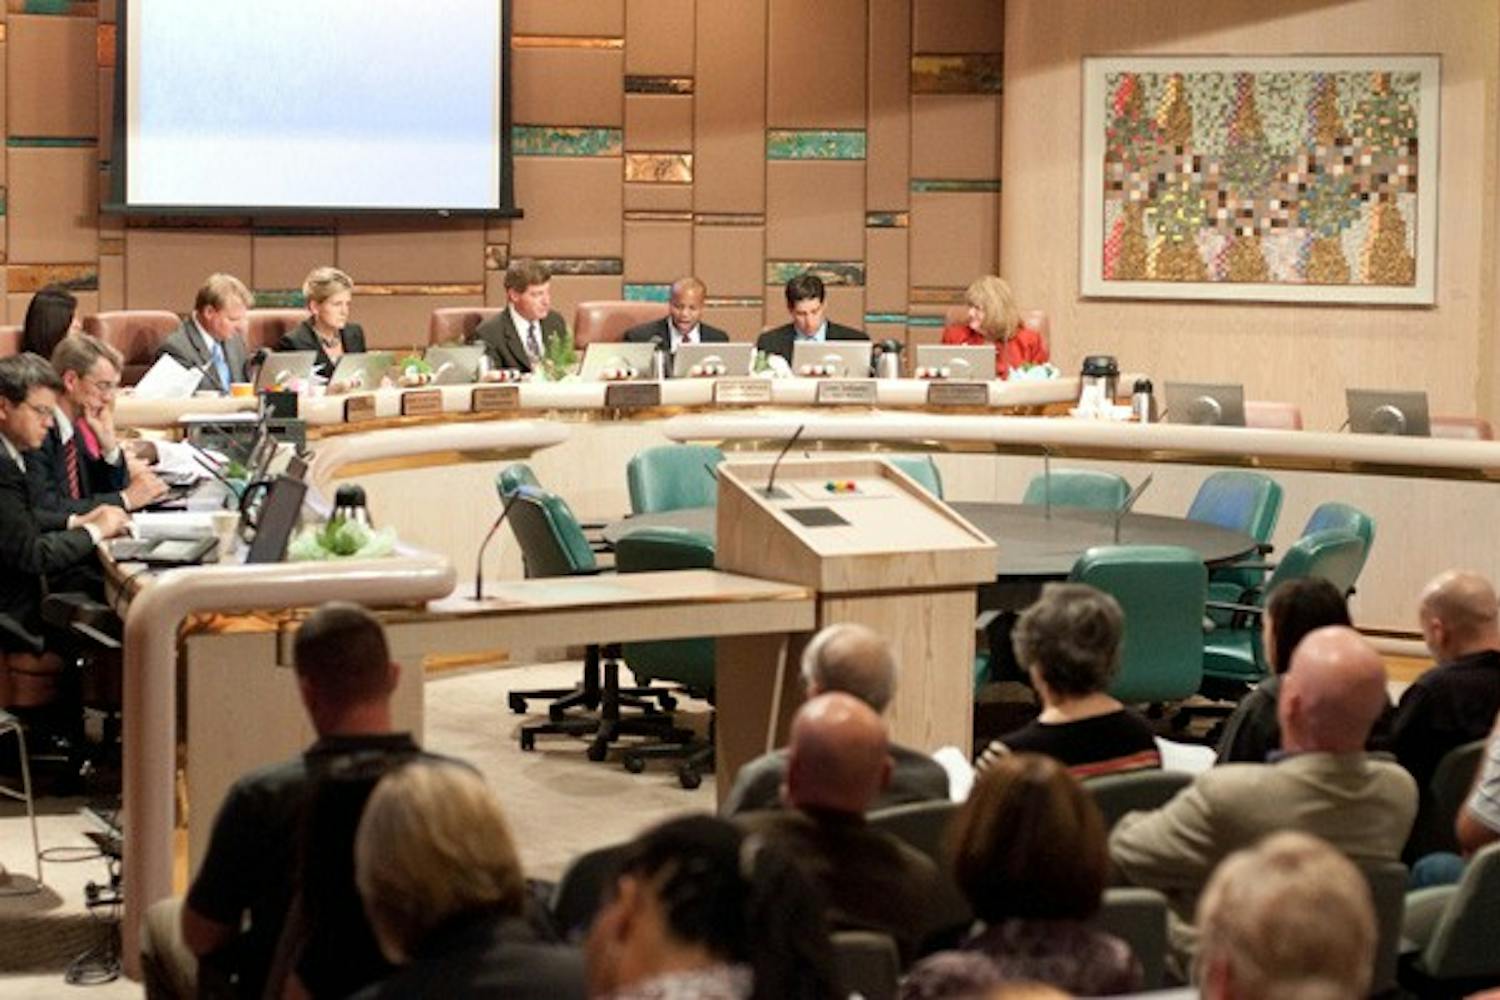 HIGH ON THE AGENDA: Tempe Mayor Hugh Hallman presides over a city council meeting on Thursday night before a highly anticipated vote on a zoning ordinance for medical marijuana. (Photo by Aaron Lavinsky)